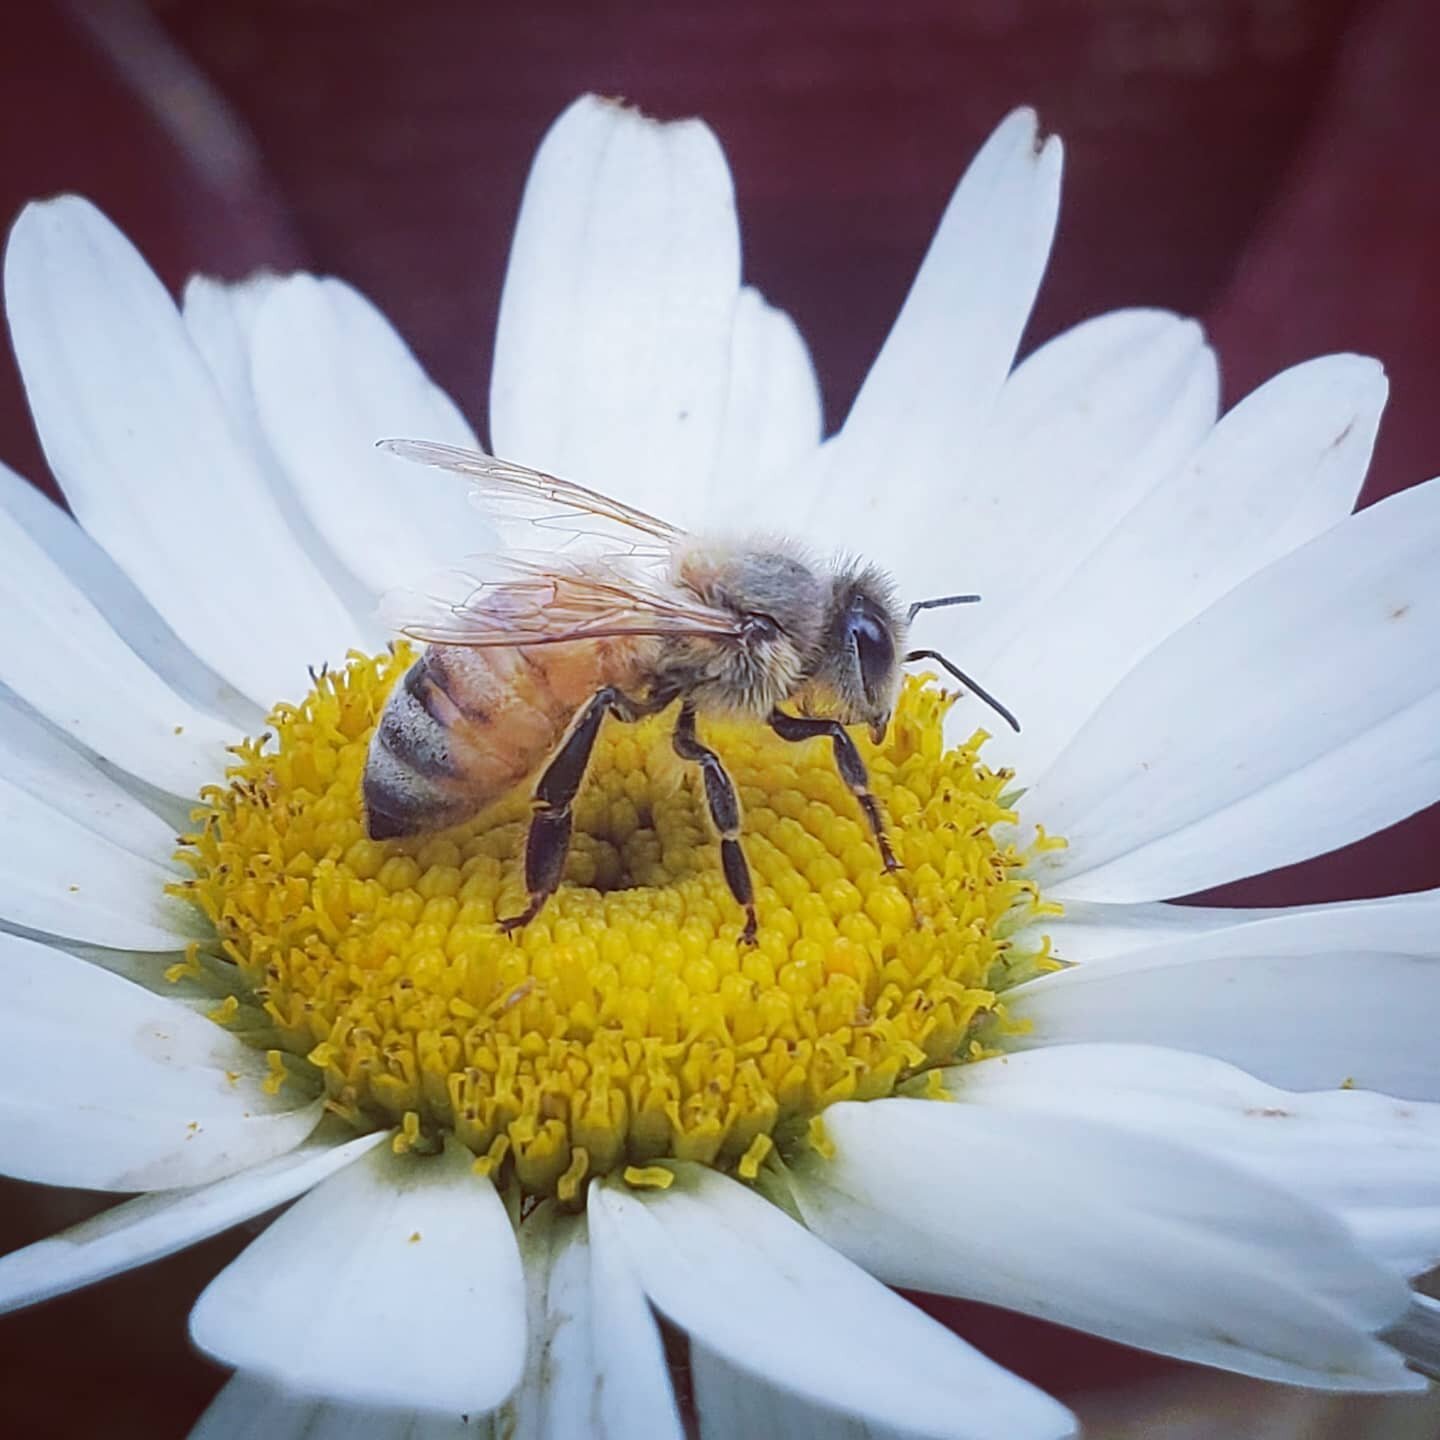 To bee.... Or not to bee
How to take thee?
A brief break you see,
Before I'm too flee

#bees #help #theworld  #littlethings #photooftheday #photographybyrlh #flowersofinstagram #flowerpower #summer2020